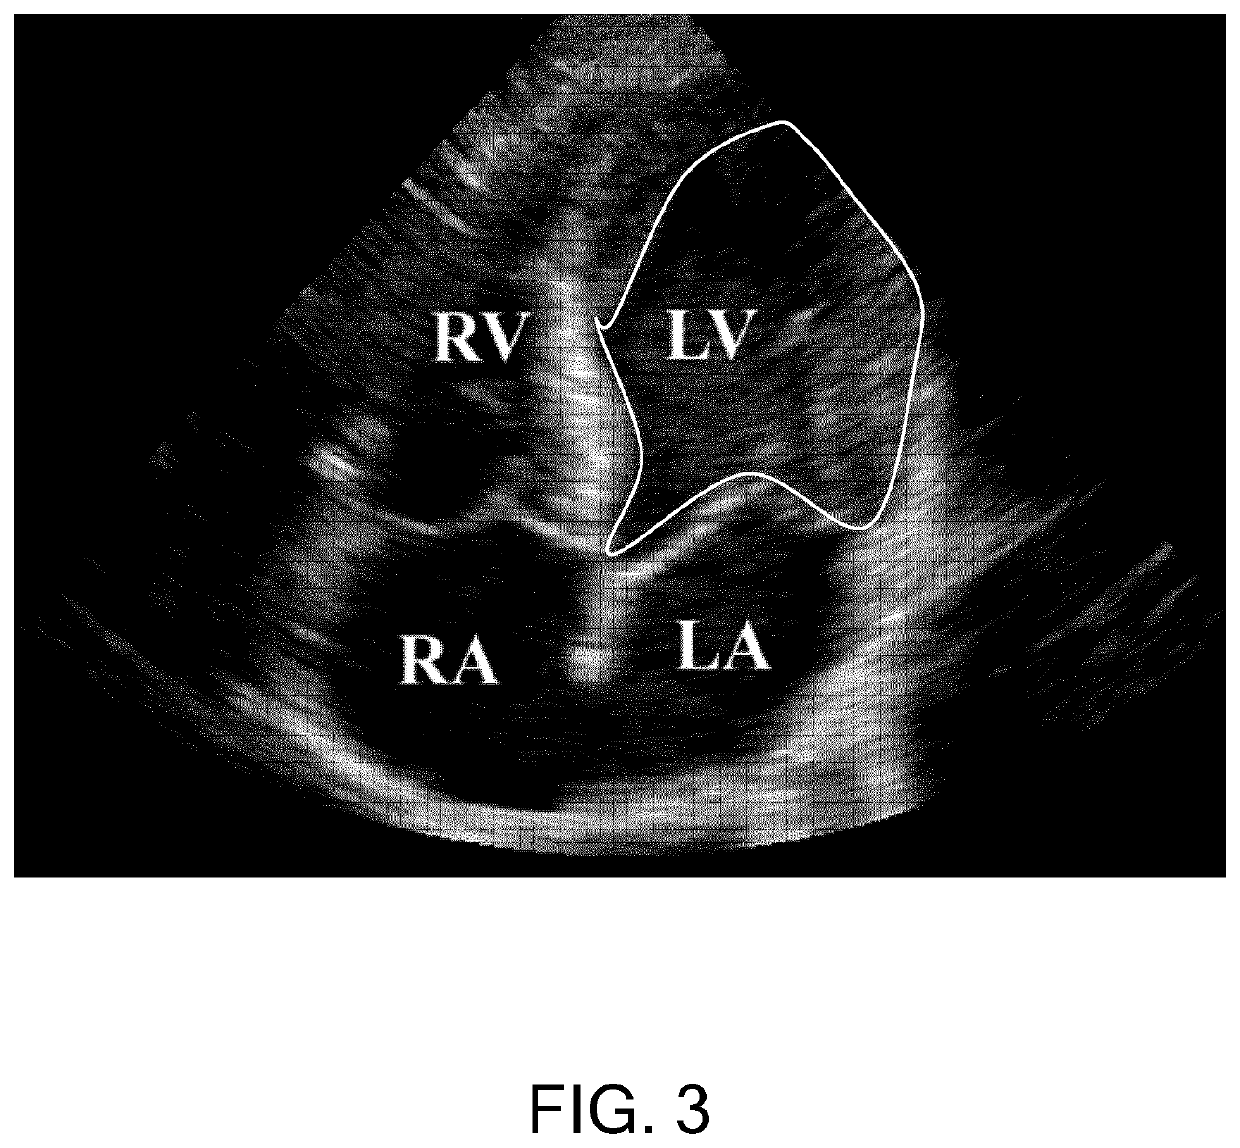 Anatomical measurements from ultrasound data